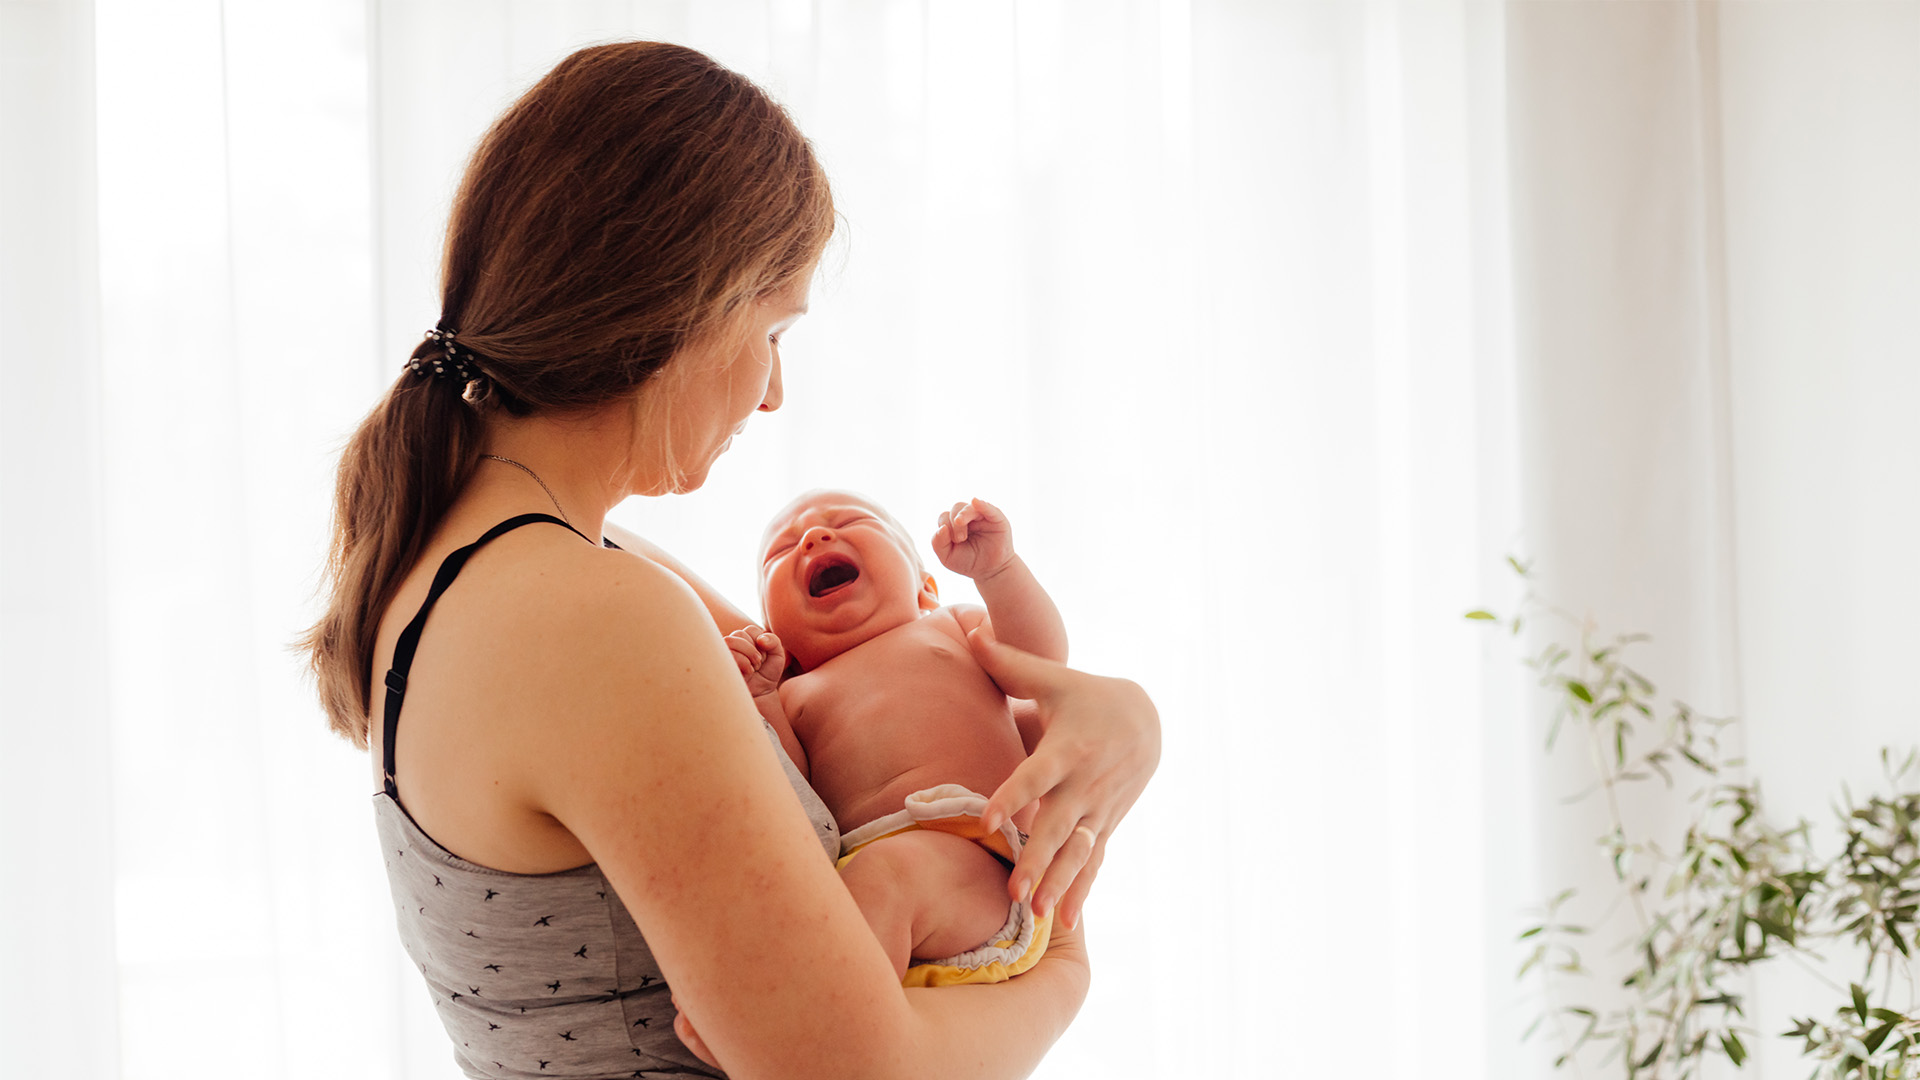 New Mom? Watch for These 10 Things That Can Happen After Giving Birth